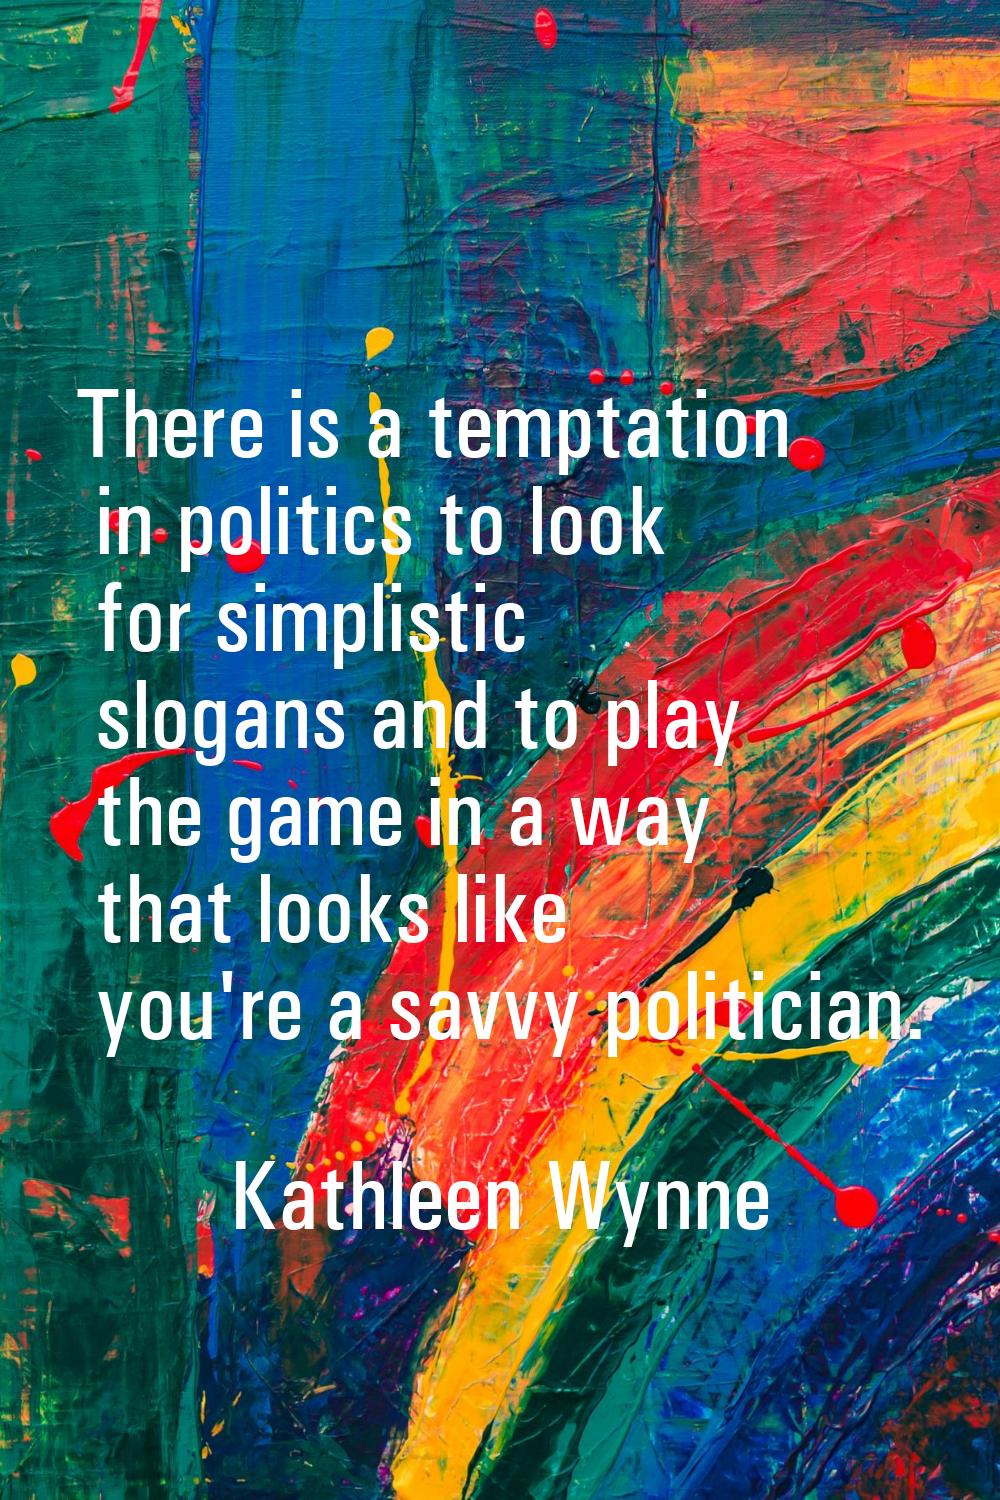 There is a temptation in politics to look for simplistic slogans and to play the game in a way that